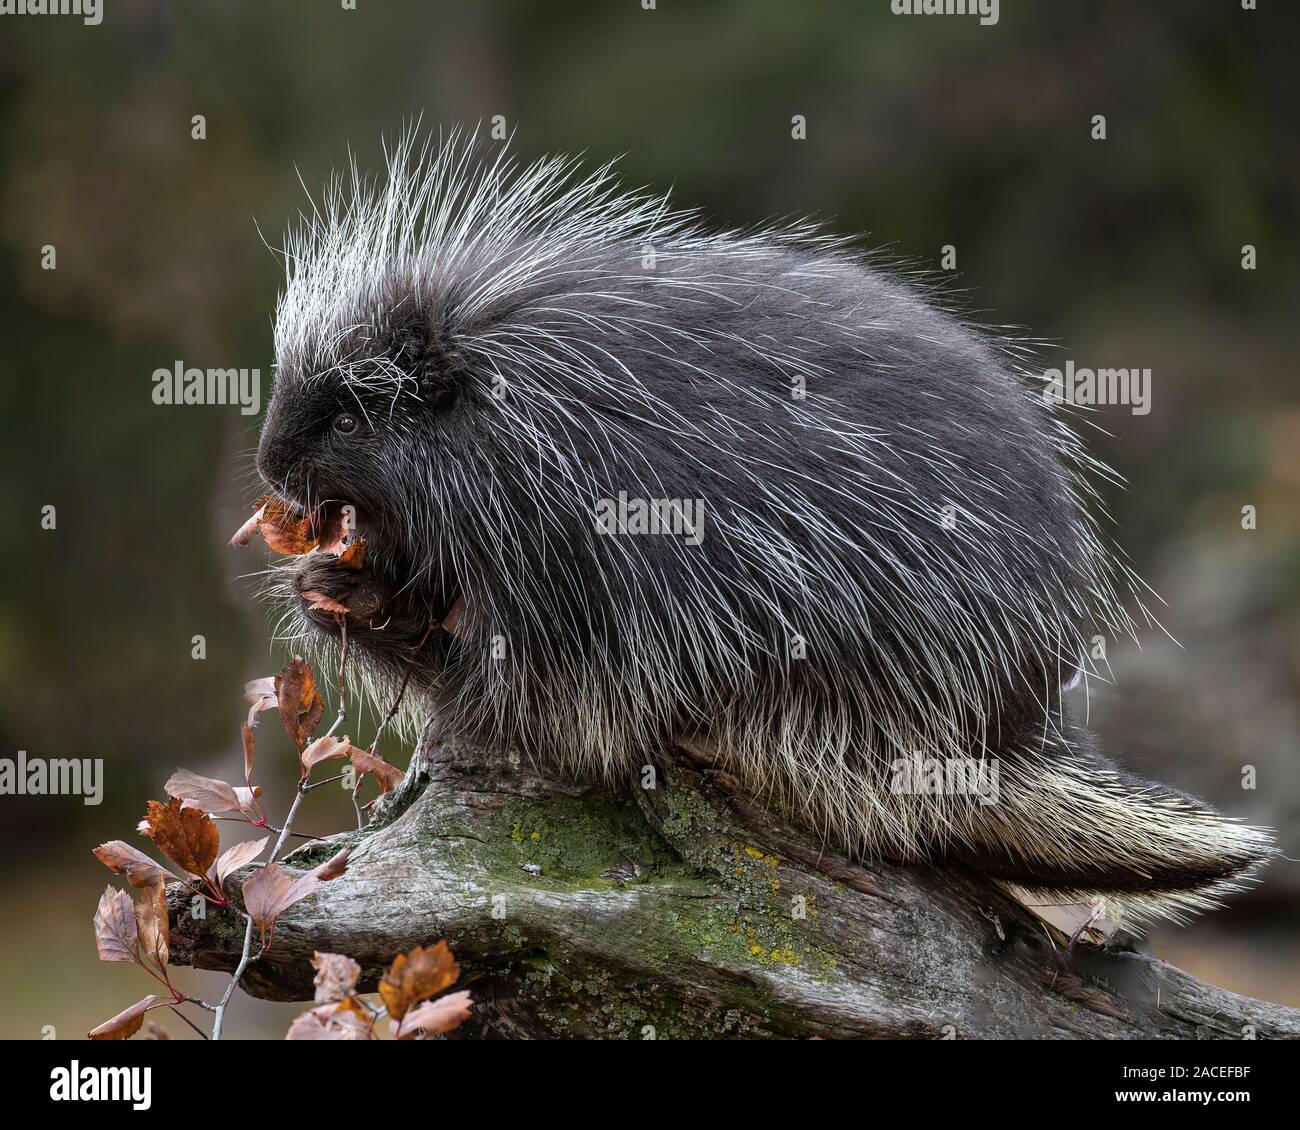 Porcupine playing and posing in Autumn leaves Stock Photo